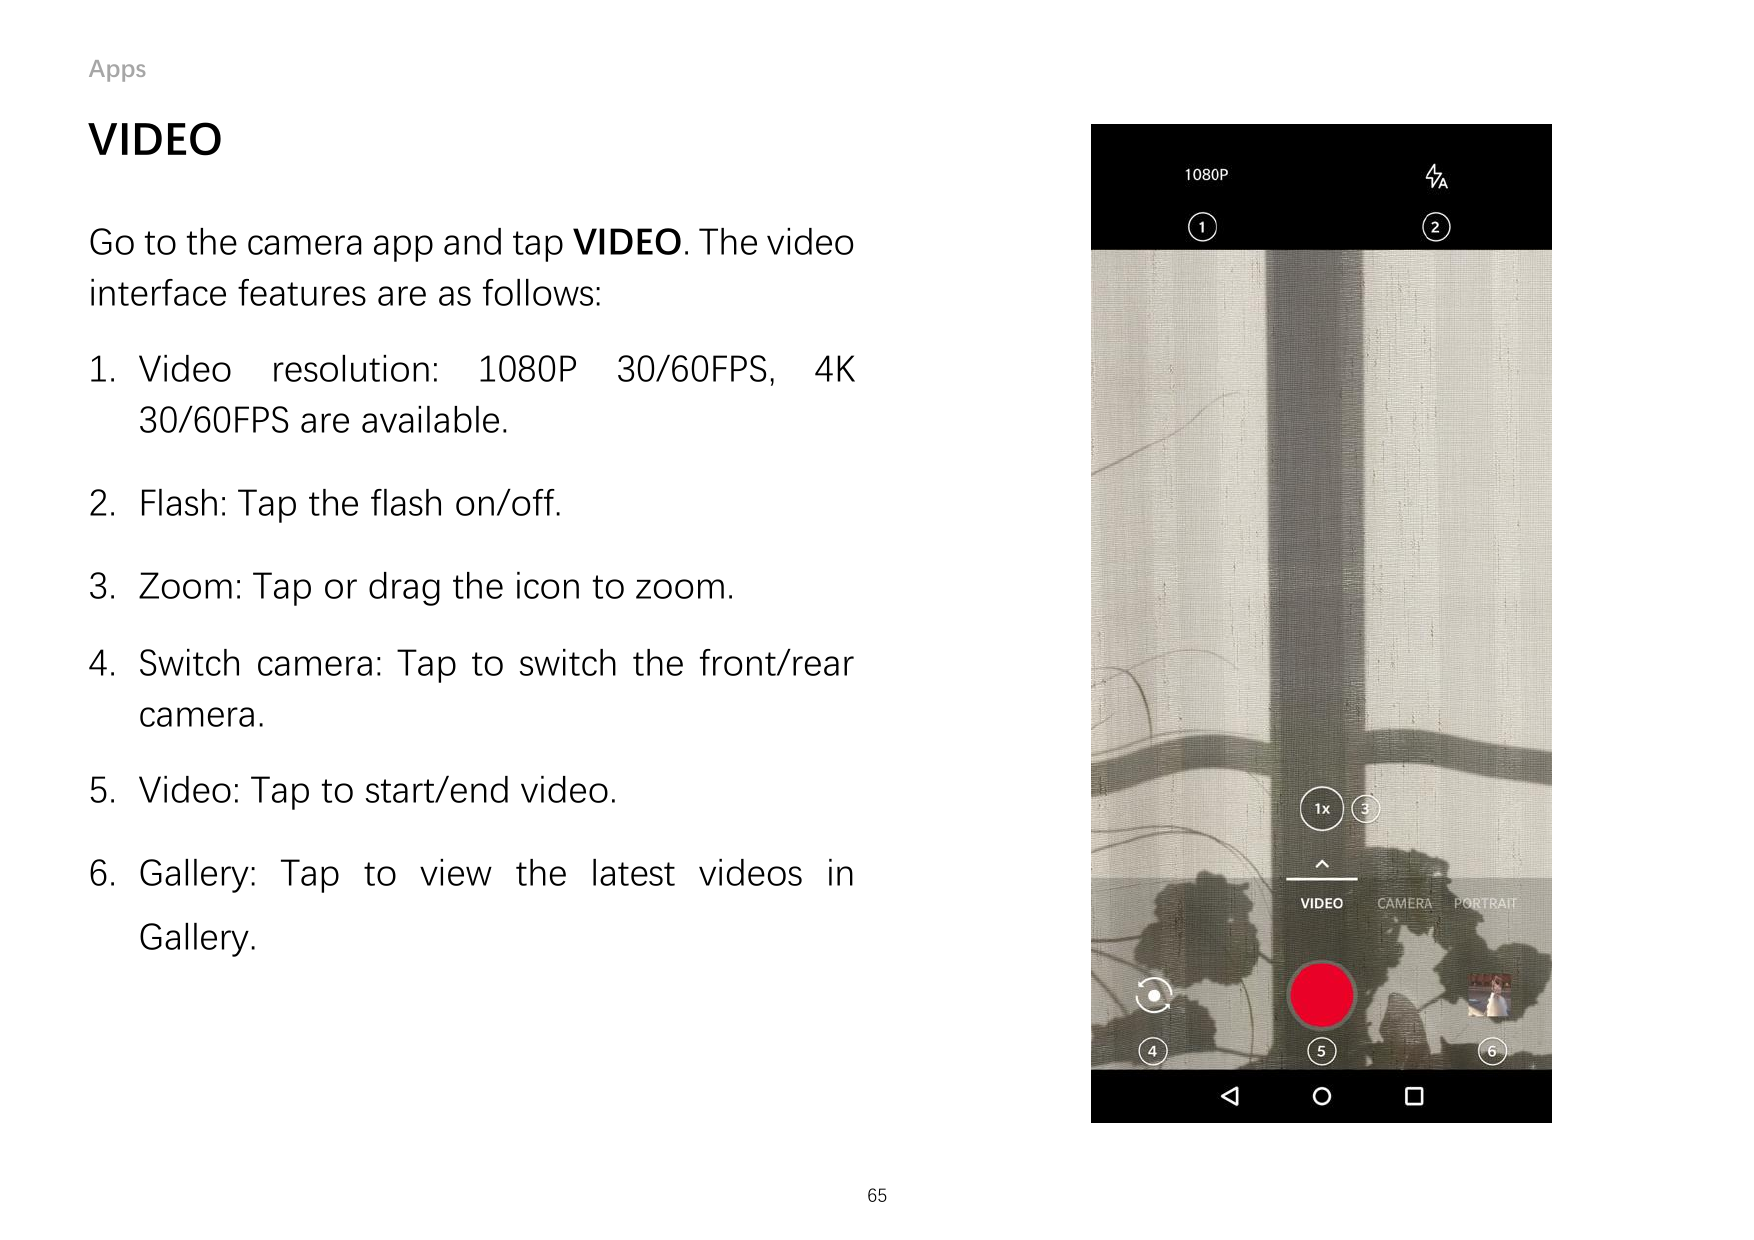 AppsVIDEOGo to the camera app and tap VIDEO. The videointerface features are as follows:1. Video resolution: 1080P30/60FPS are a